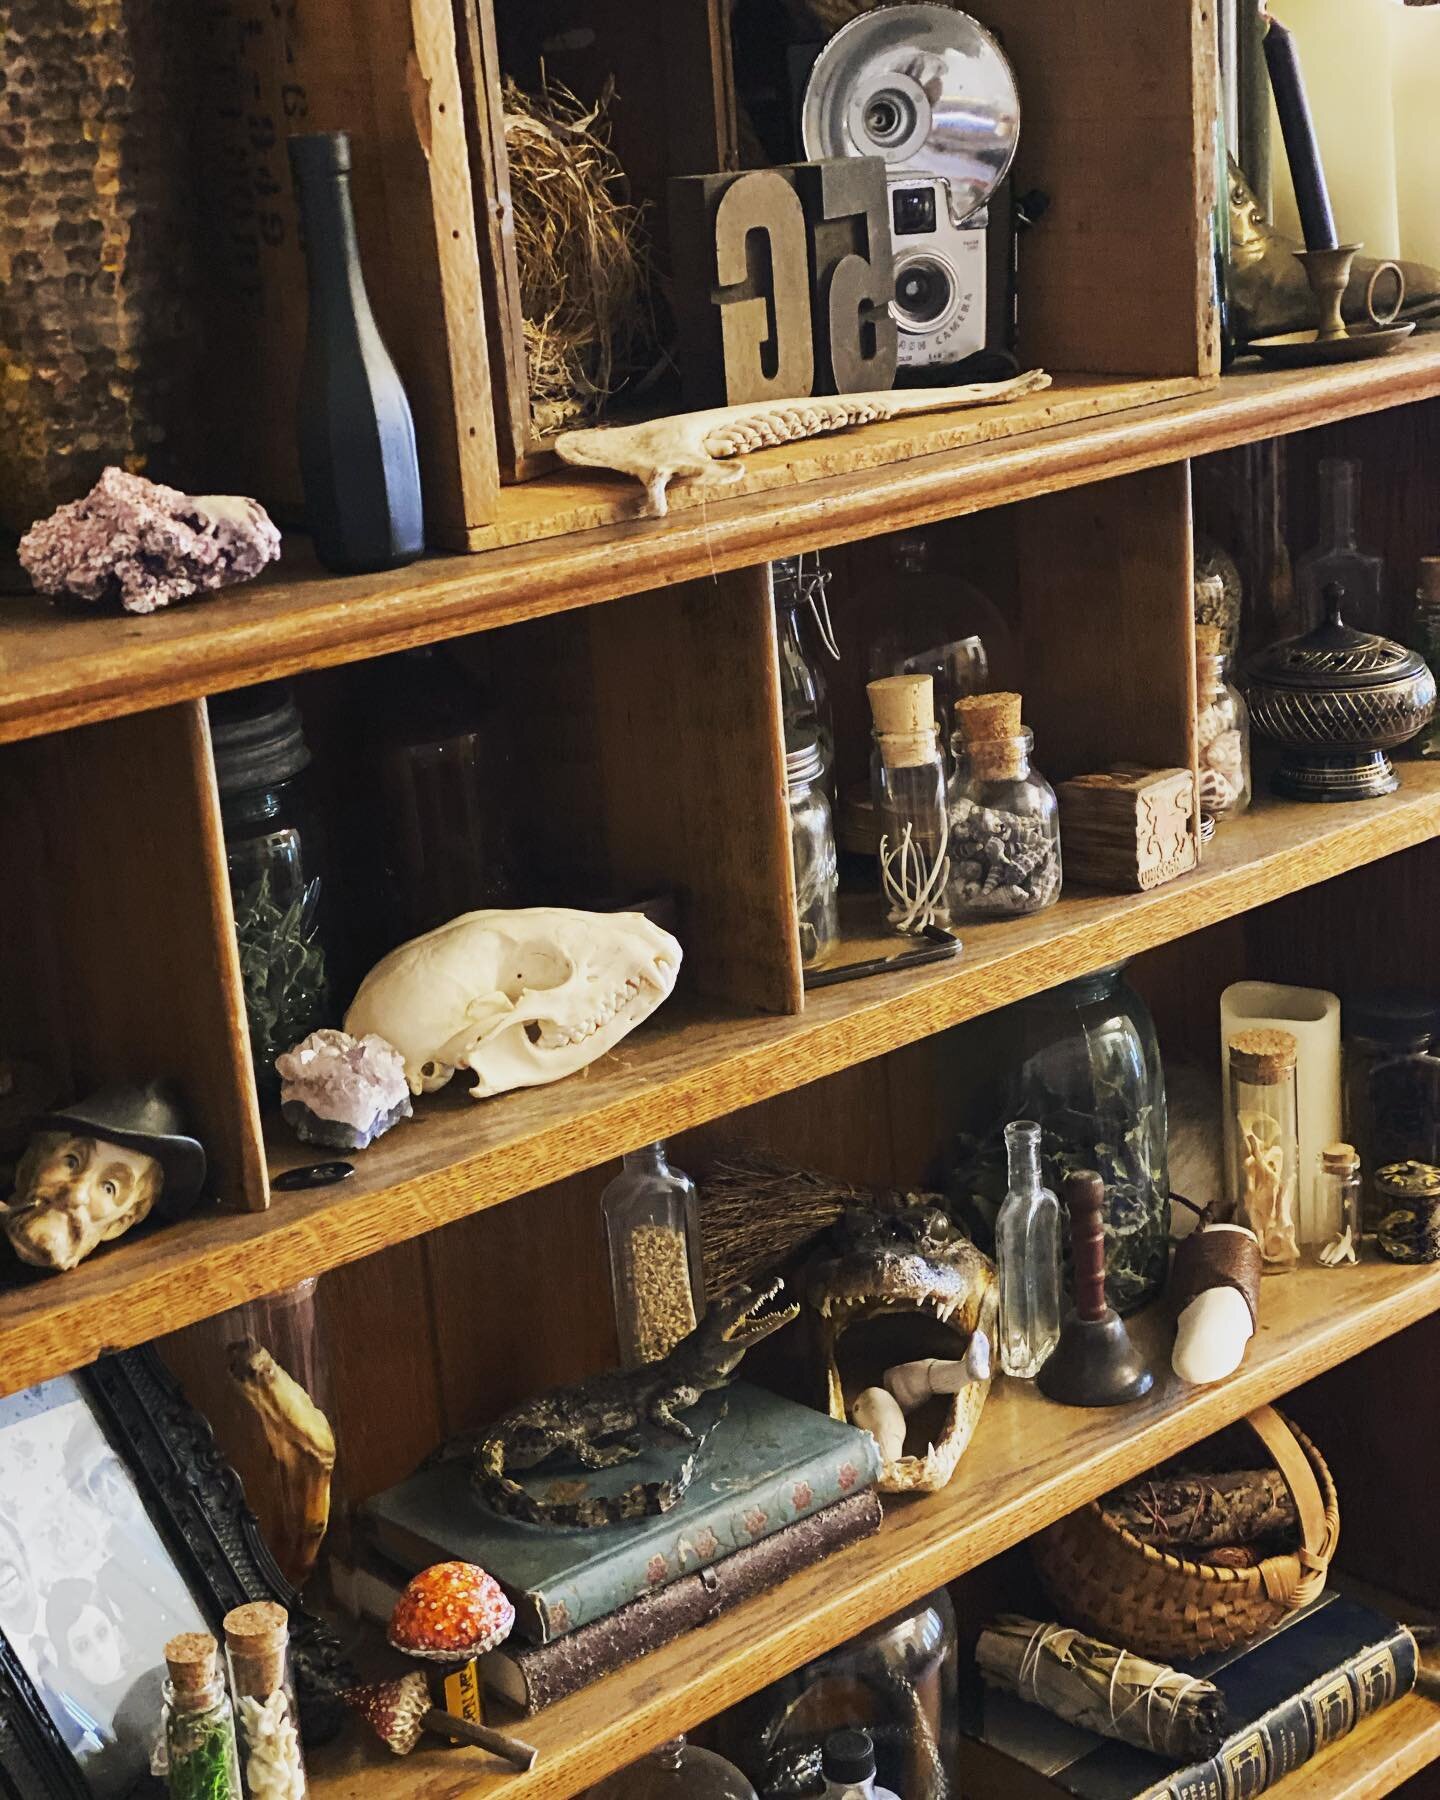 I have a fairly large case of curiosities at my home in addition to several cabinets and letterpress displays (I&rsquo;m a bit of a curiosity hoarder). With that said... I am slowly noticing my husband&rsquo;s contributions to the displays. Several h